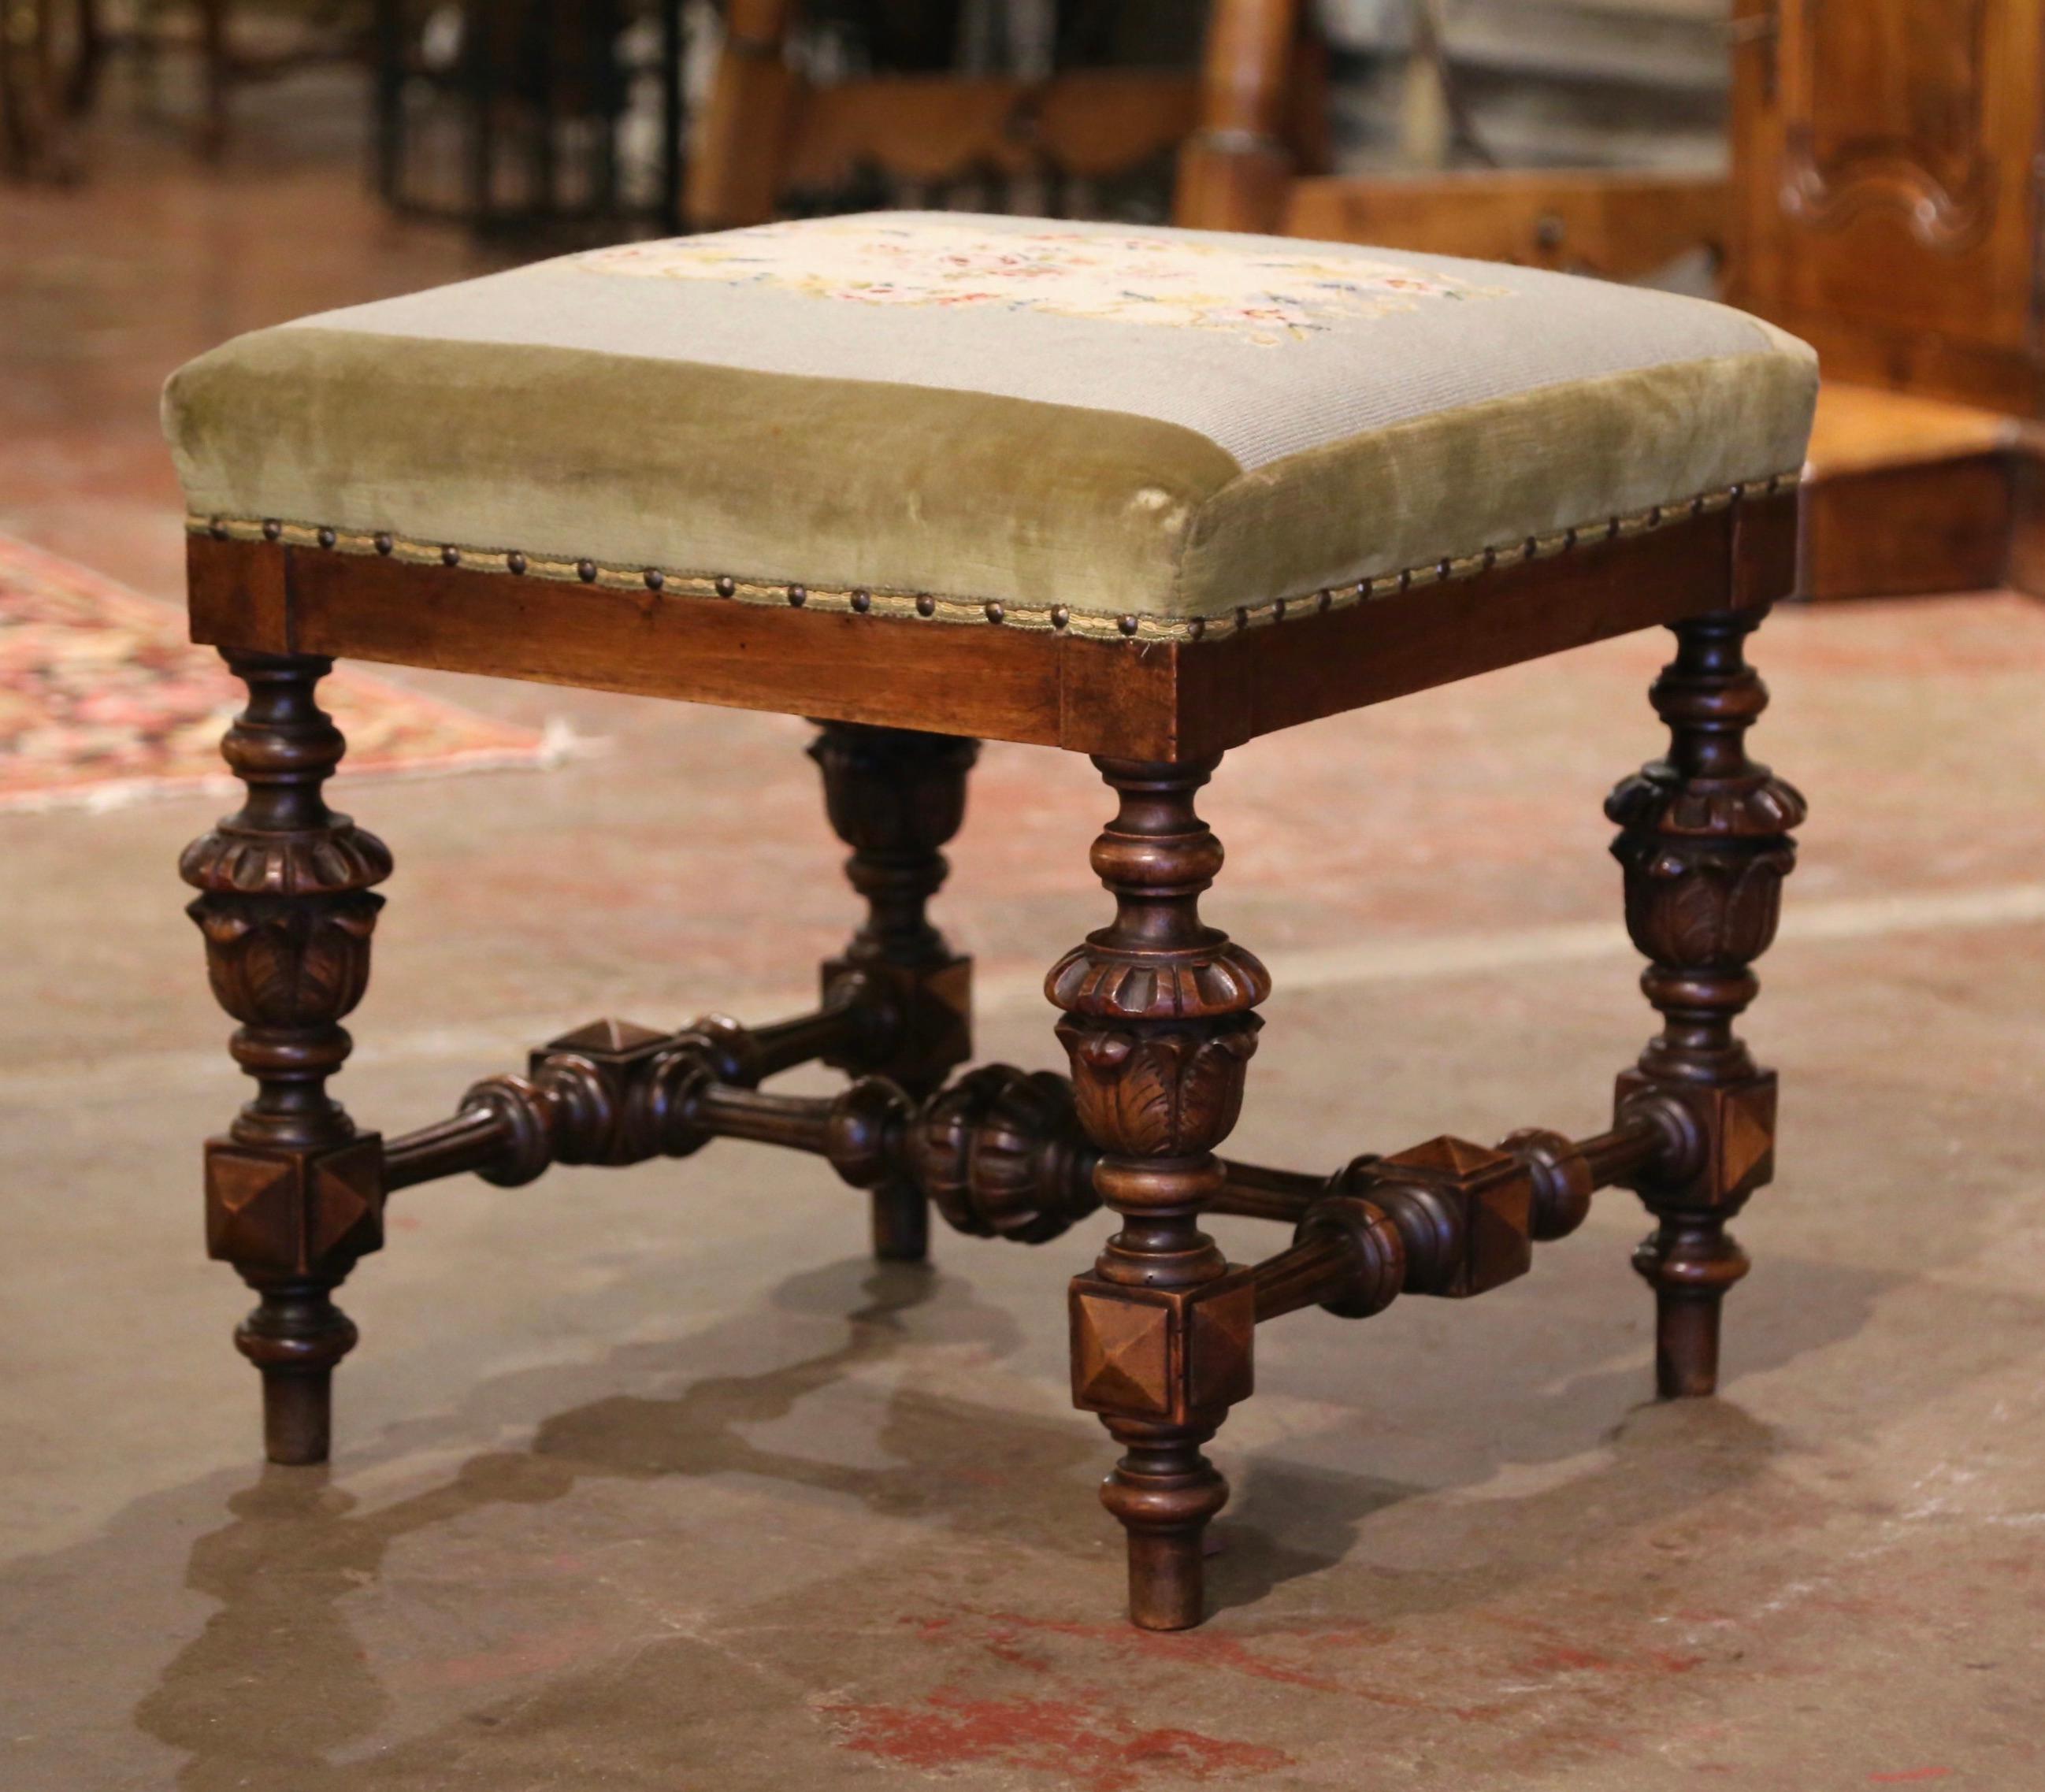 This elegant antique fruitwood stool was crafted in Southern France, circa 1870. Square in shape, the stool stands on heavily turned legs decorated with hand carved diamond shape medallions over an elaborate stretcher. The seat is upholstered with